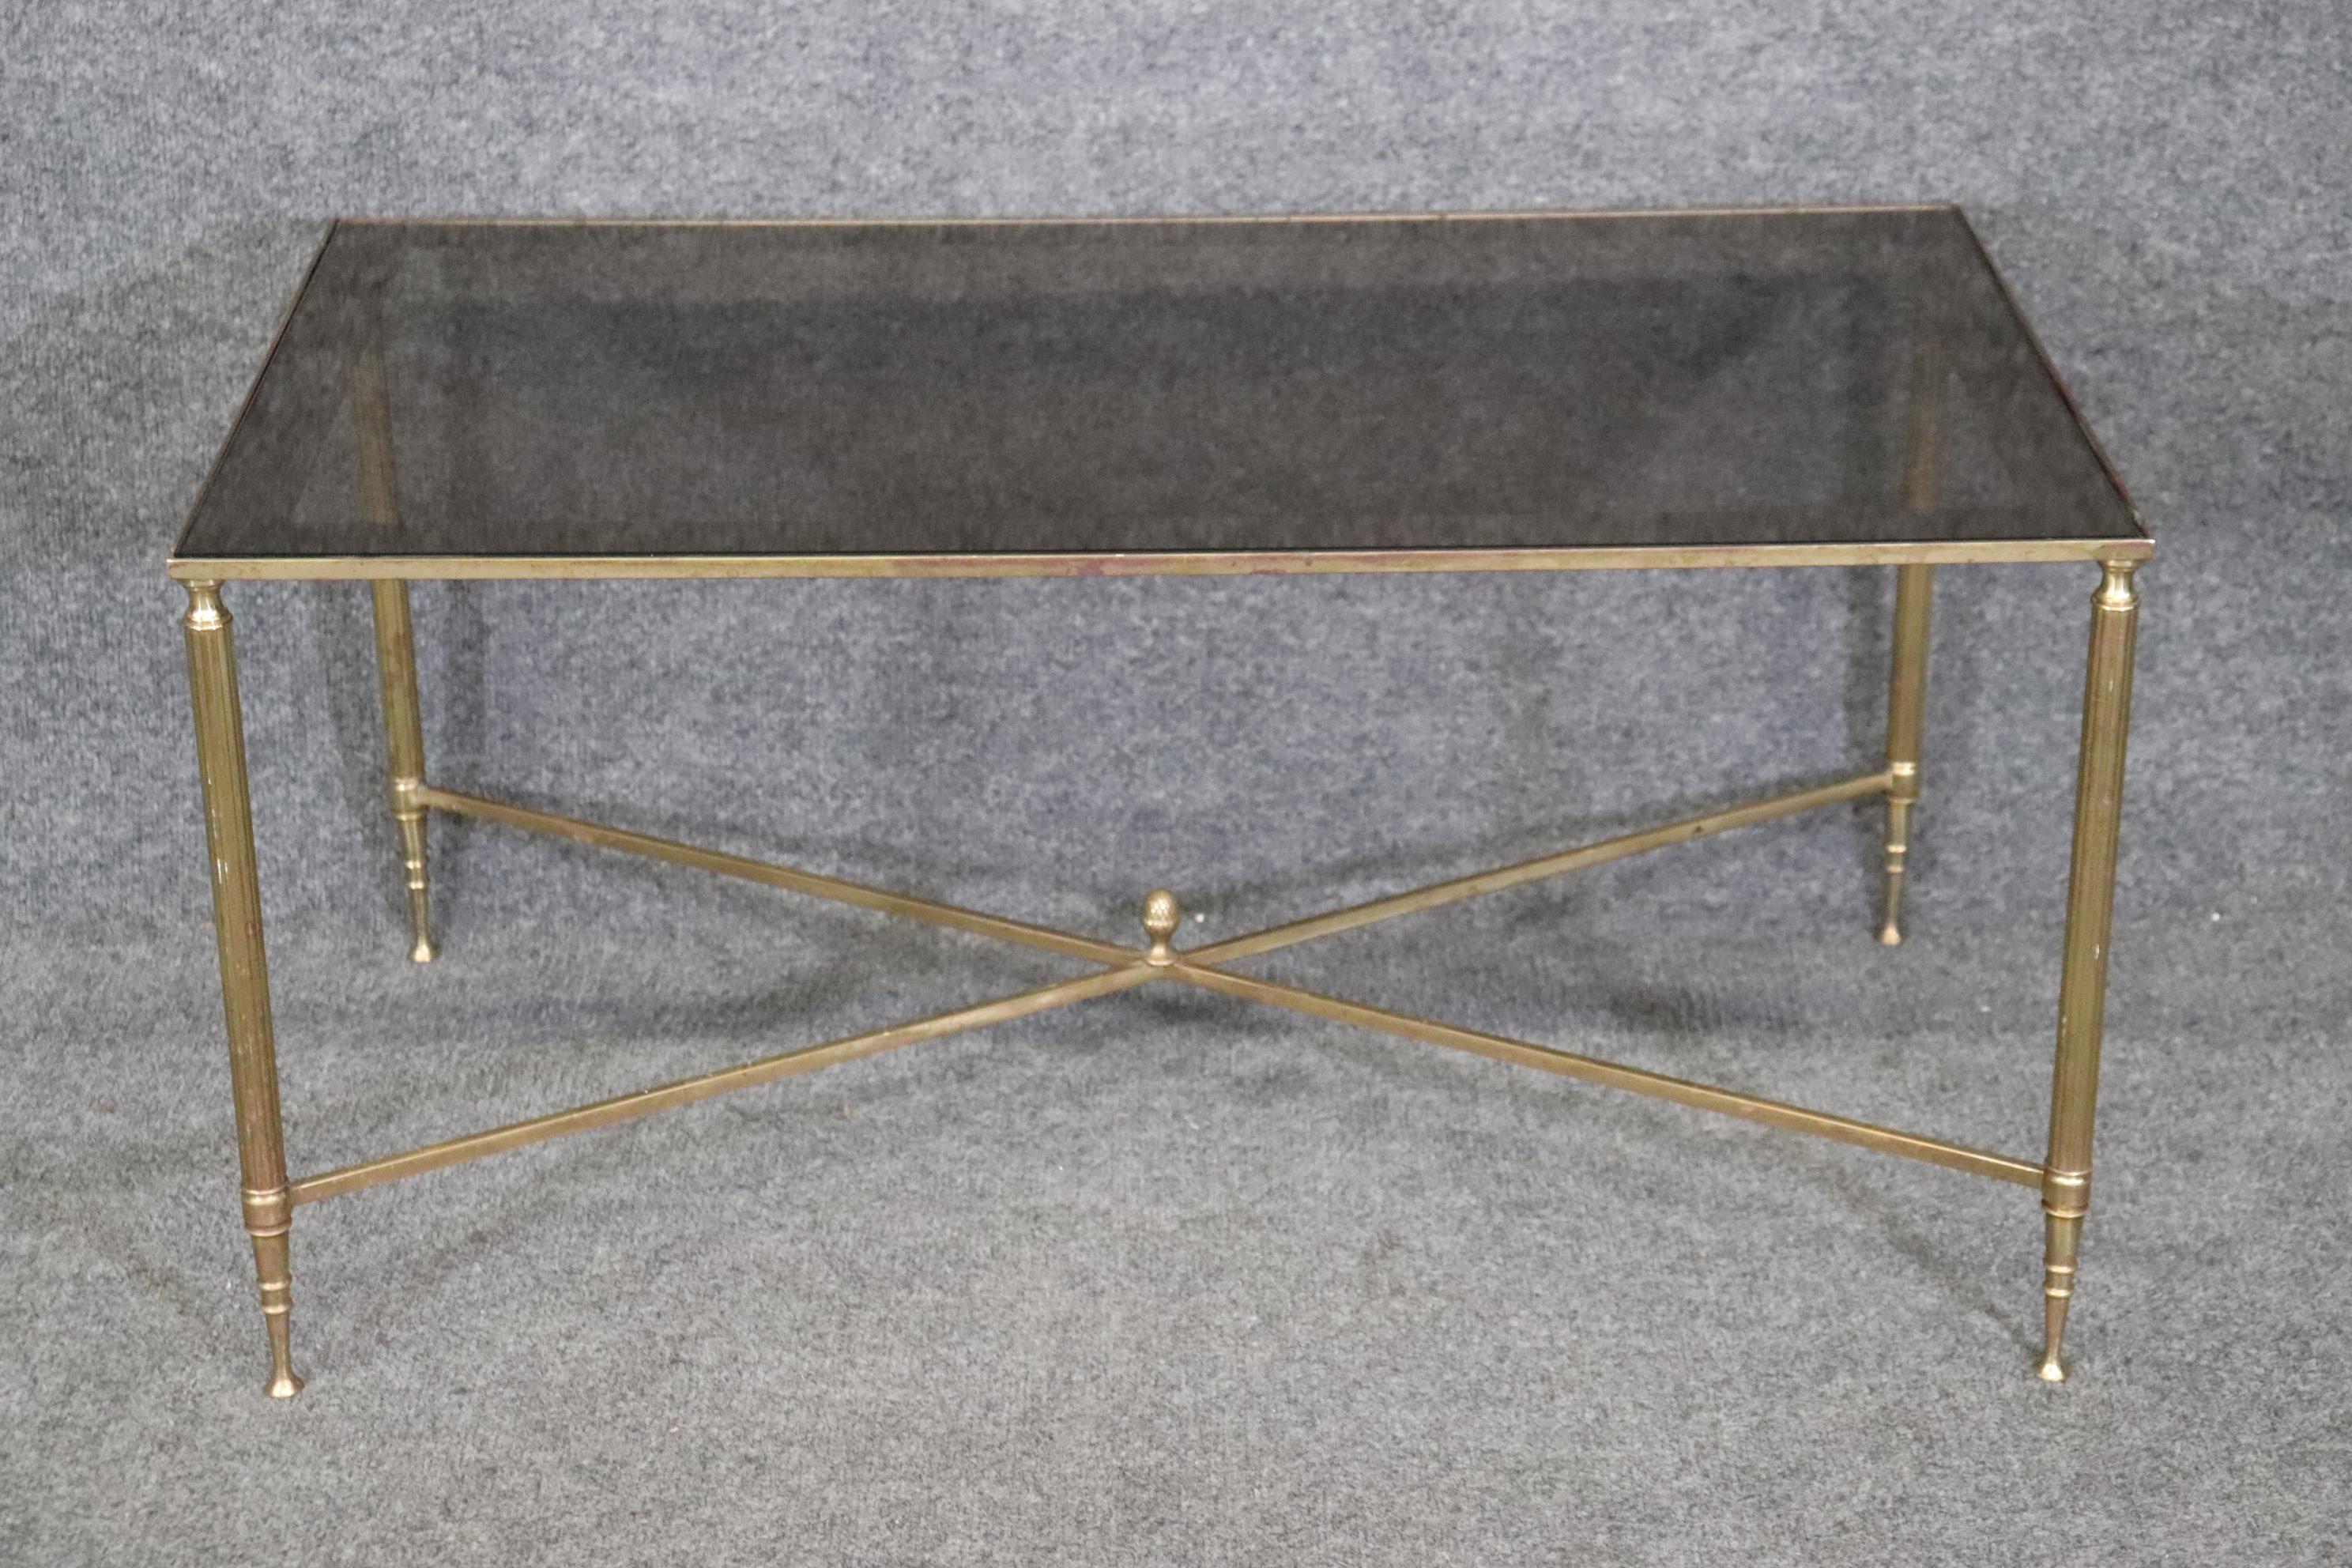 Dimensions: Height: 17 in Width: 33 3/4 in Depth: 19 in 


This French Regency style glass top coffee table is of the highest quality!  Although not signed, we strongly believe this was made by Maison Jansen. 
Maison Jansen made some of the world's